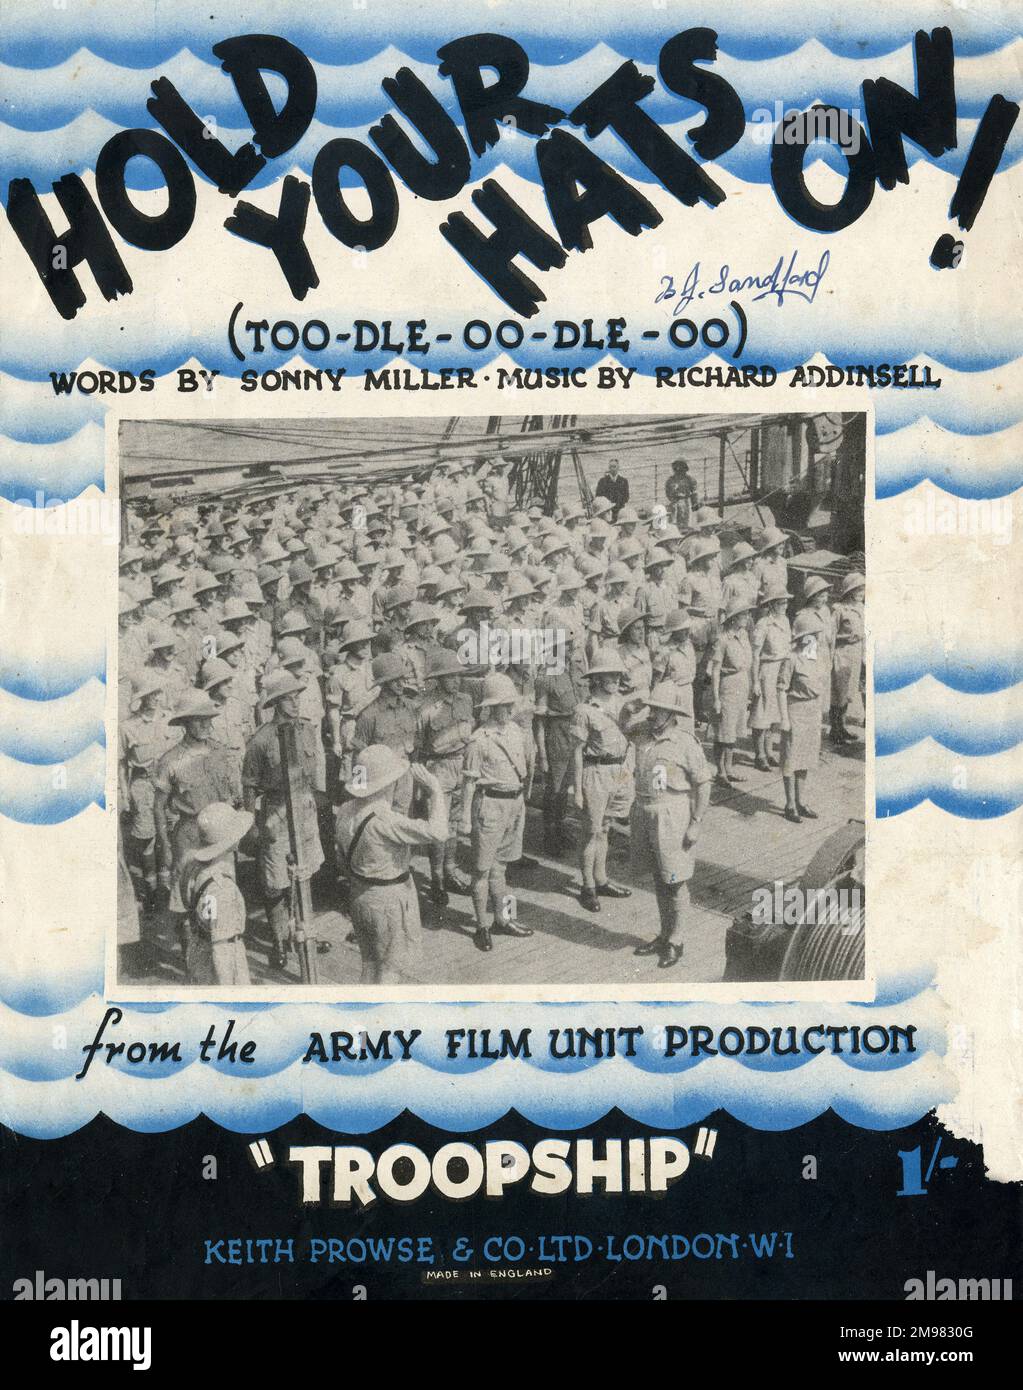 Music cover, Hold Your Hats On!  (Too-dle-oo-dle-oo), words by Sonny Miller, music by Richard Addinsell, from the Army Film Unit production, Troopship, during the Second World War. Stock Photo